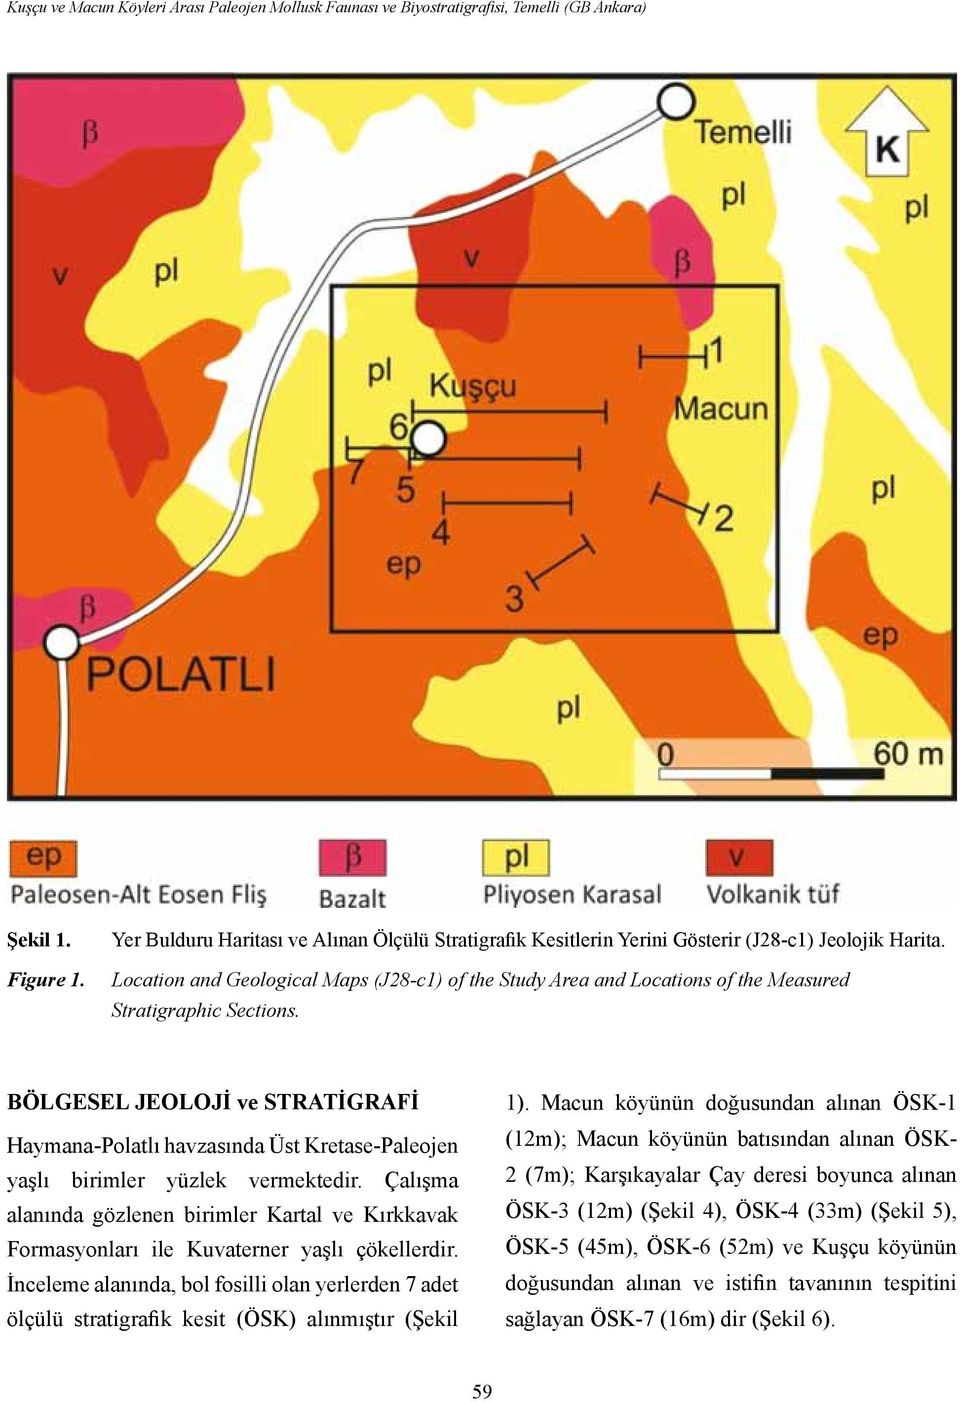 Location and Geological Maps (J28-c1) of the Study Area and Locations of the Measured Stratigraphic Sections.